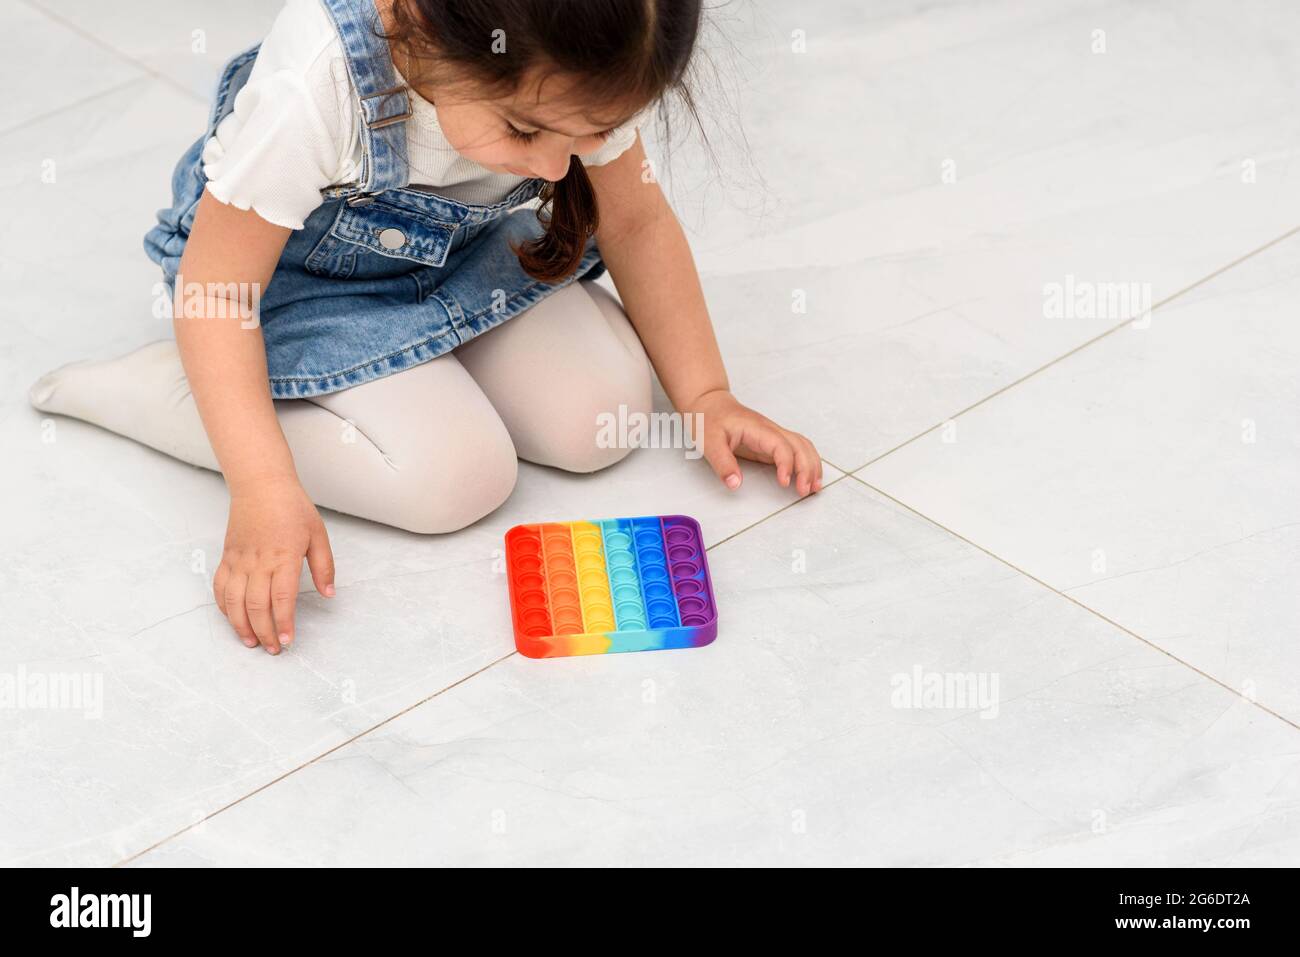 Young Little Girl Sitting On The Floor At School Playing Poppit-New Fidget Toy, Popular With Kids, Helps Them To Concentrate. Child Playing With The Pop It Fidget Toy. Stock Photo